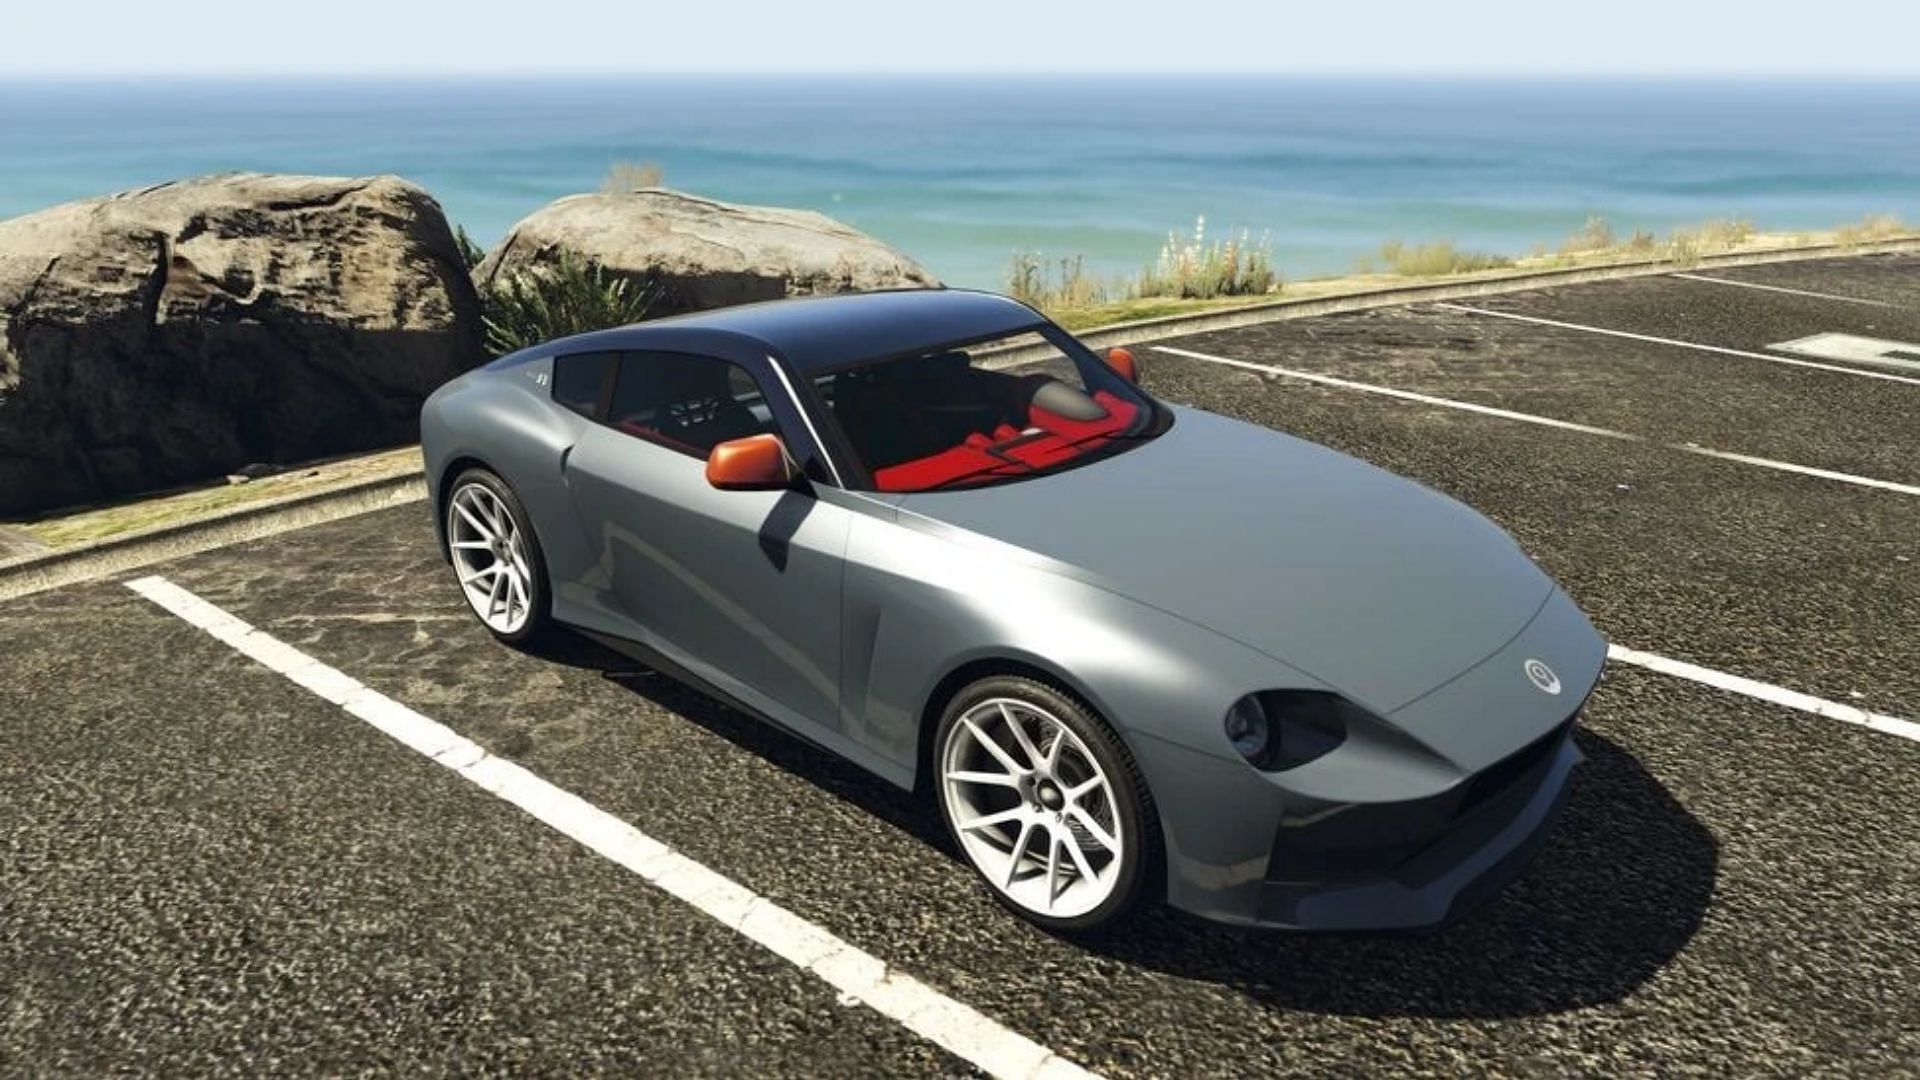 Another official image pertaining to this car (Image via Rockstar Games)